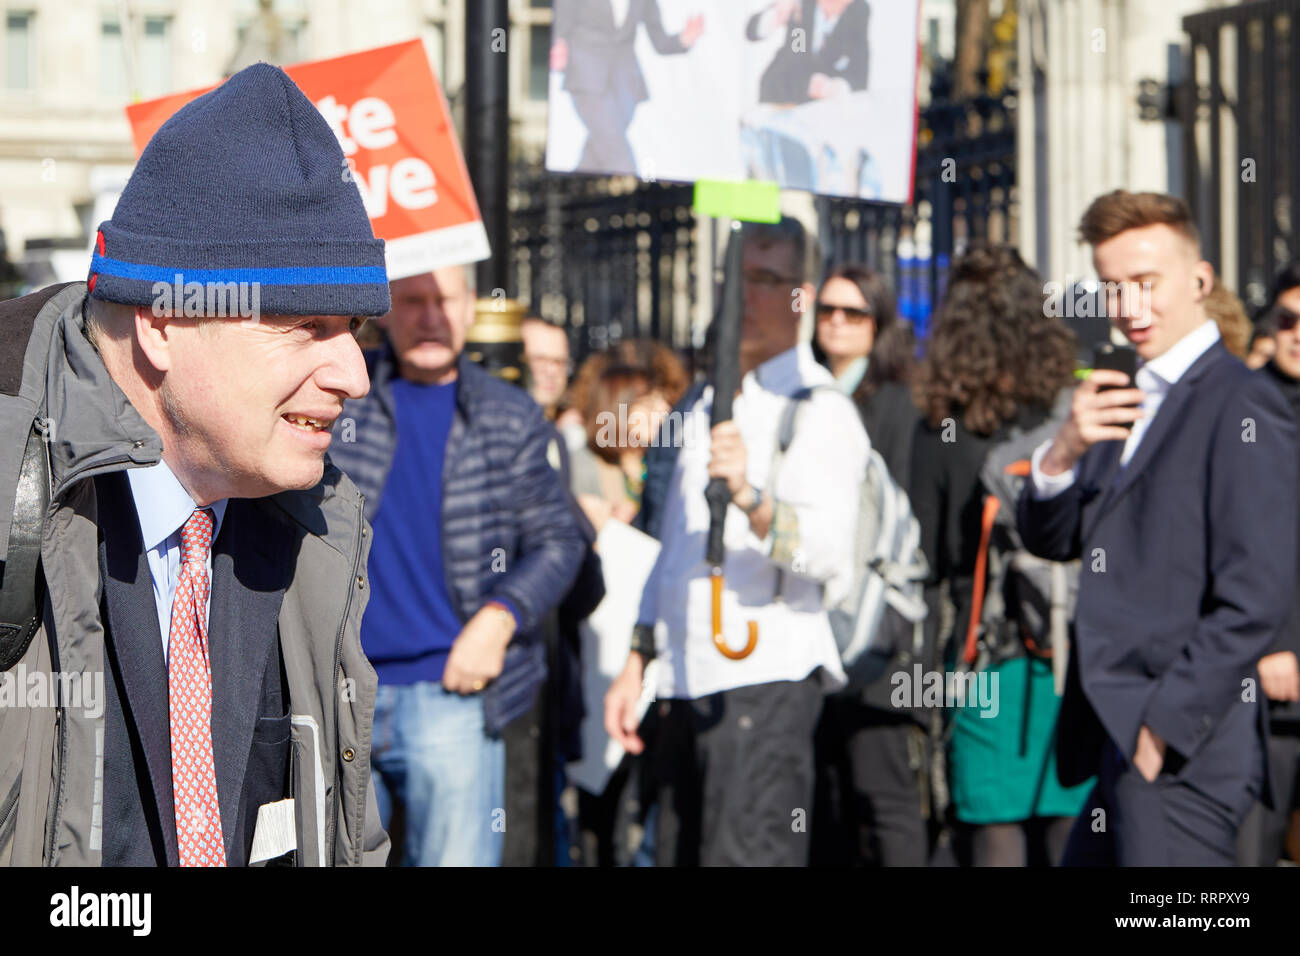 London, UK. 26th Feb, 2019. UK Conservative party politician and Leave supporter Boris Johnson passes Brexit campaigners on his way into Parliament. Credit: Kevin J. Frost/Alamy Live News Stock Photo